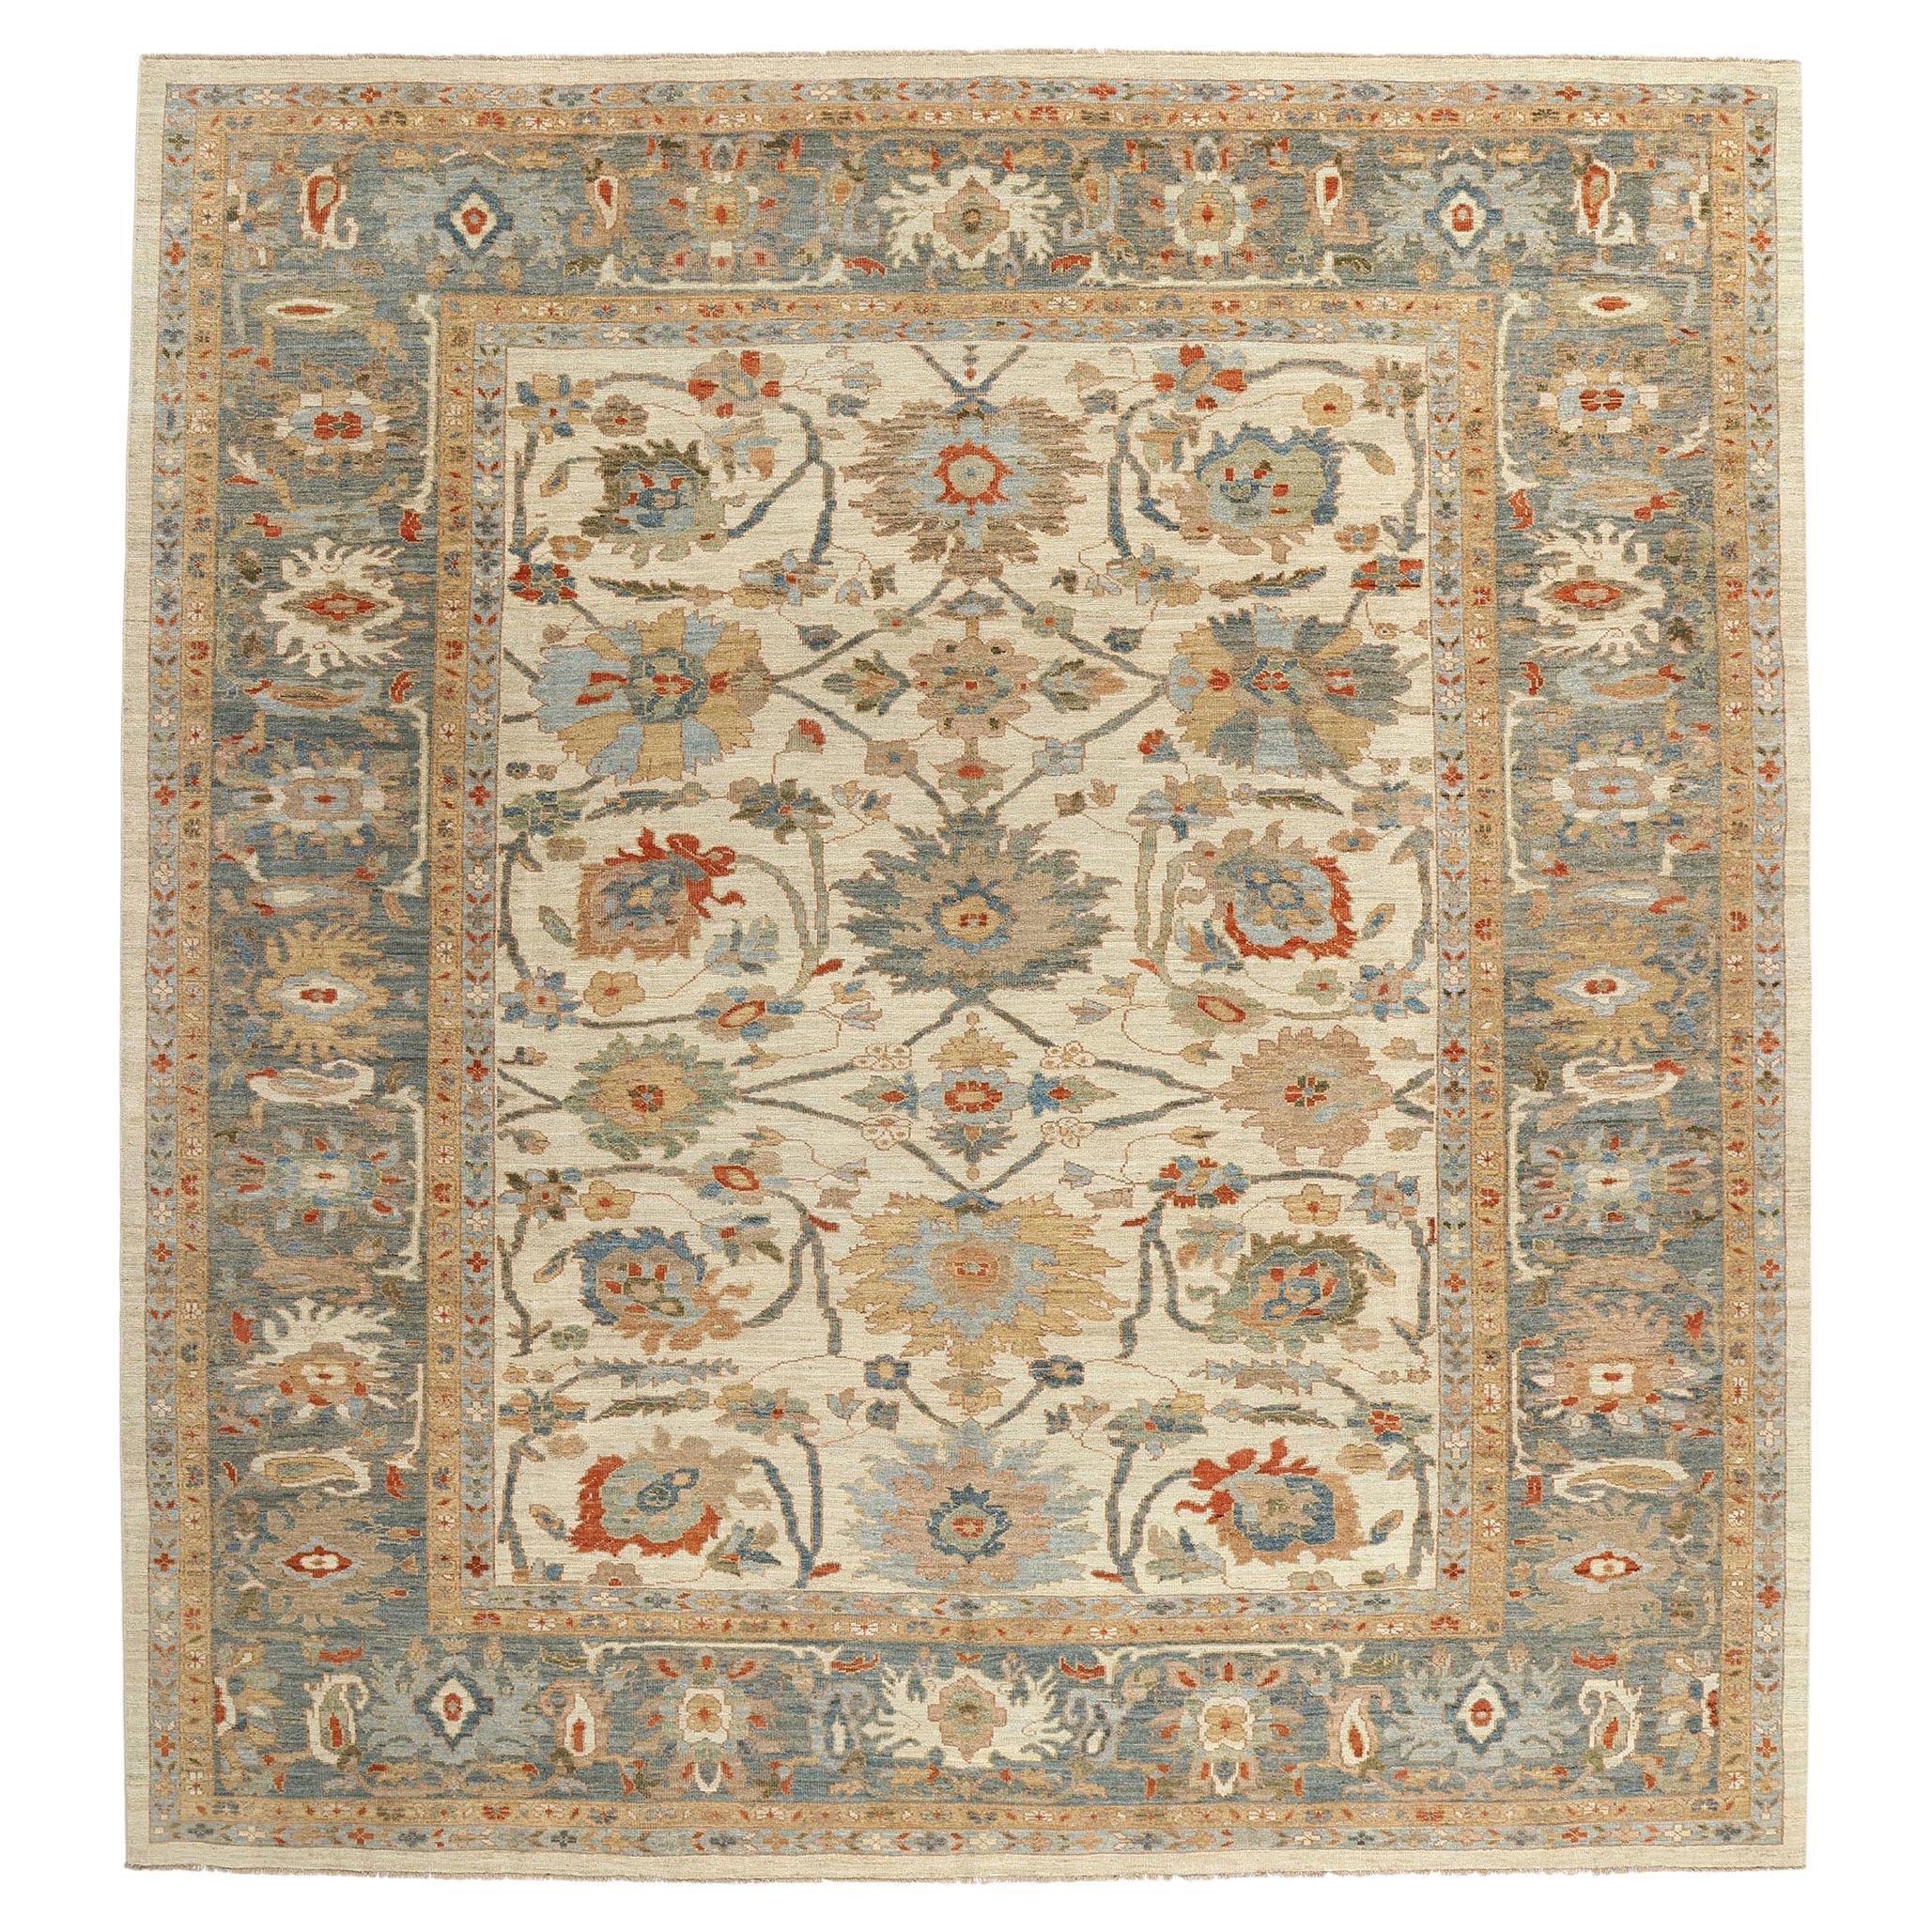 Contemporary Tan and Blue Persian Sultanabad Rug